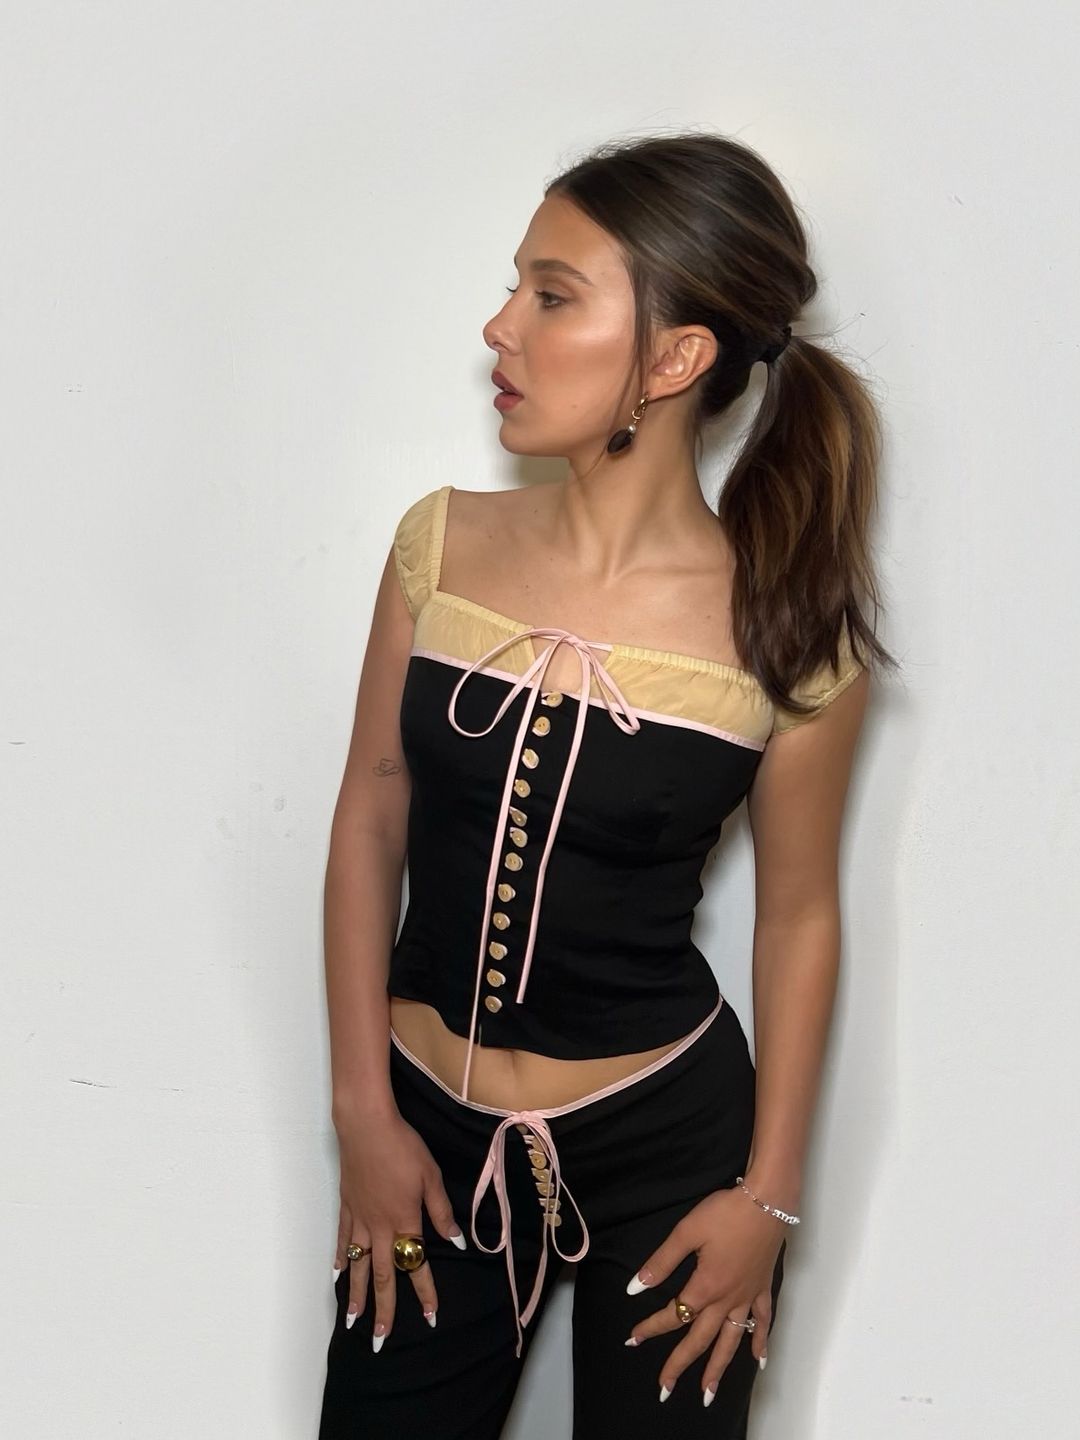 Millie Bobby Brown poses on her Instagram in a corset top and trousers